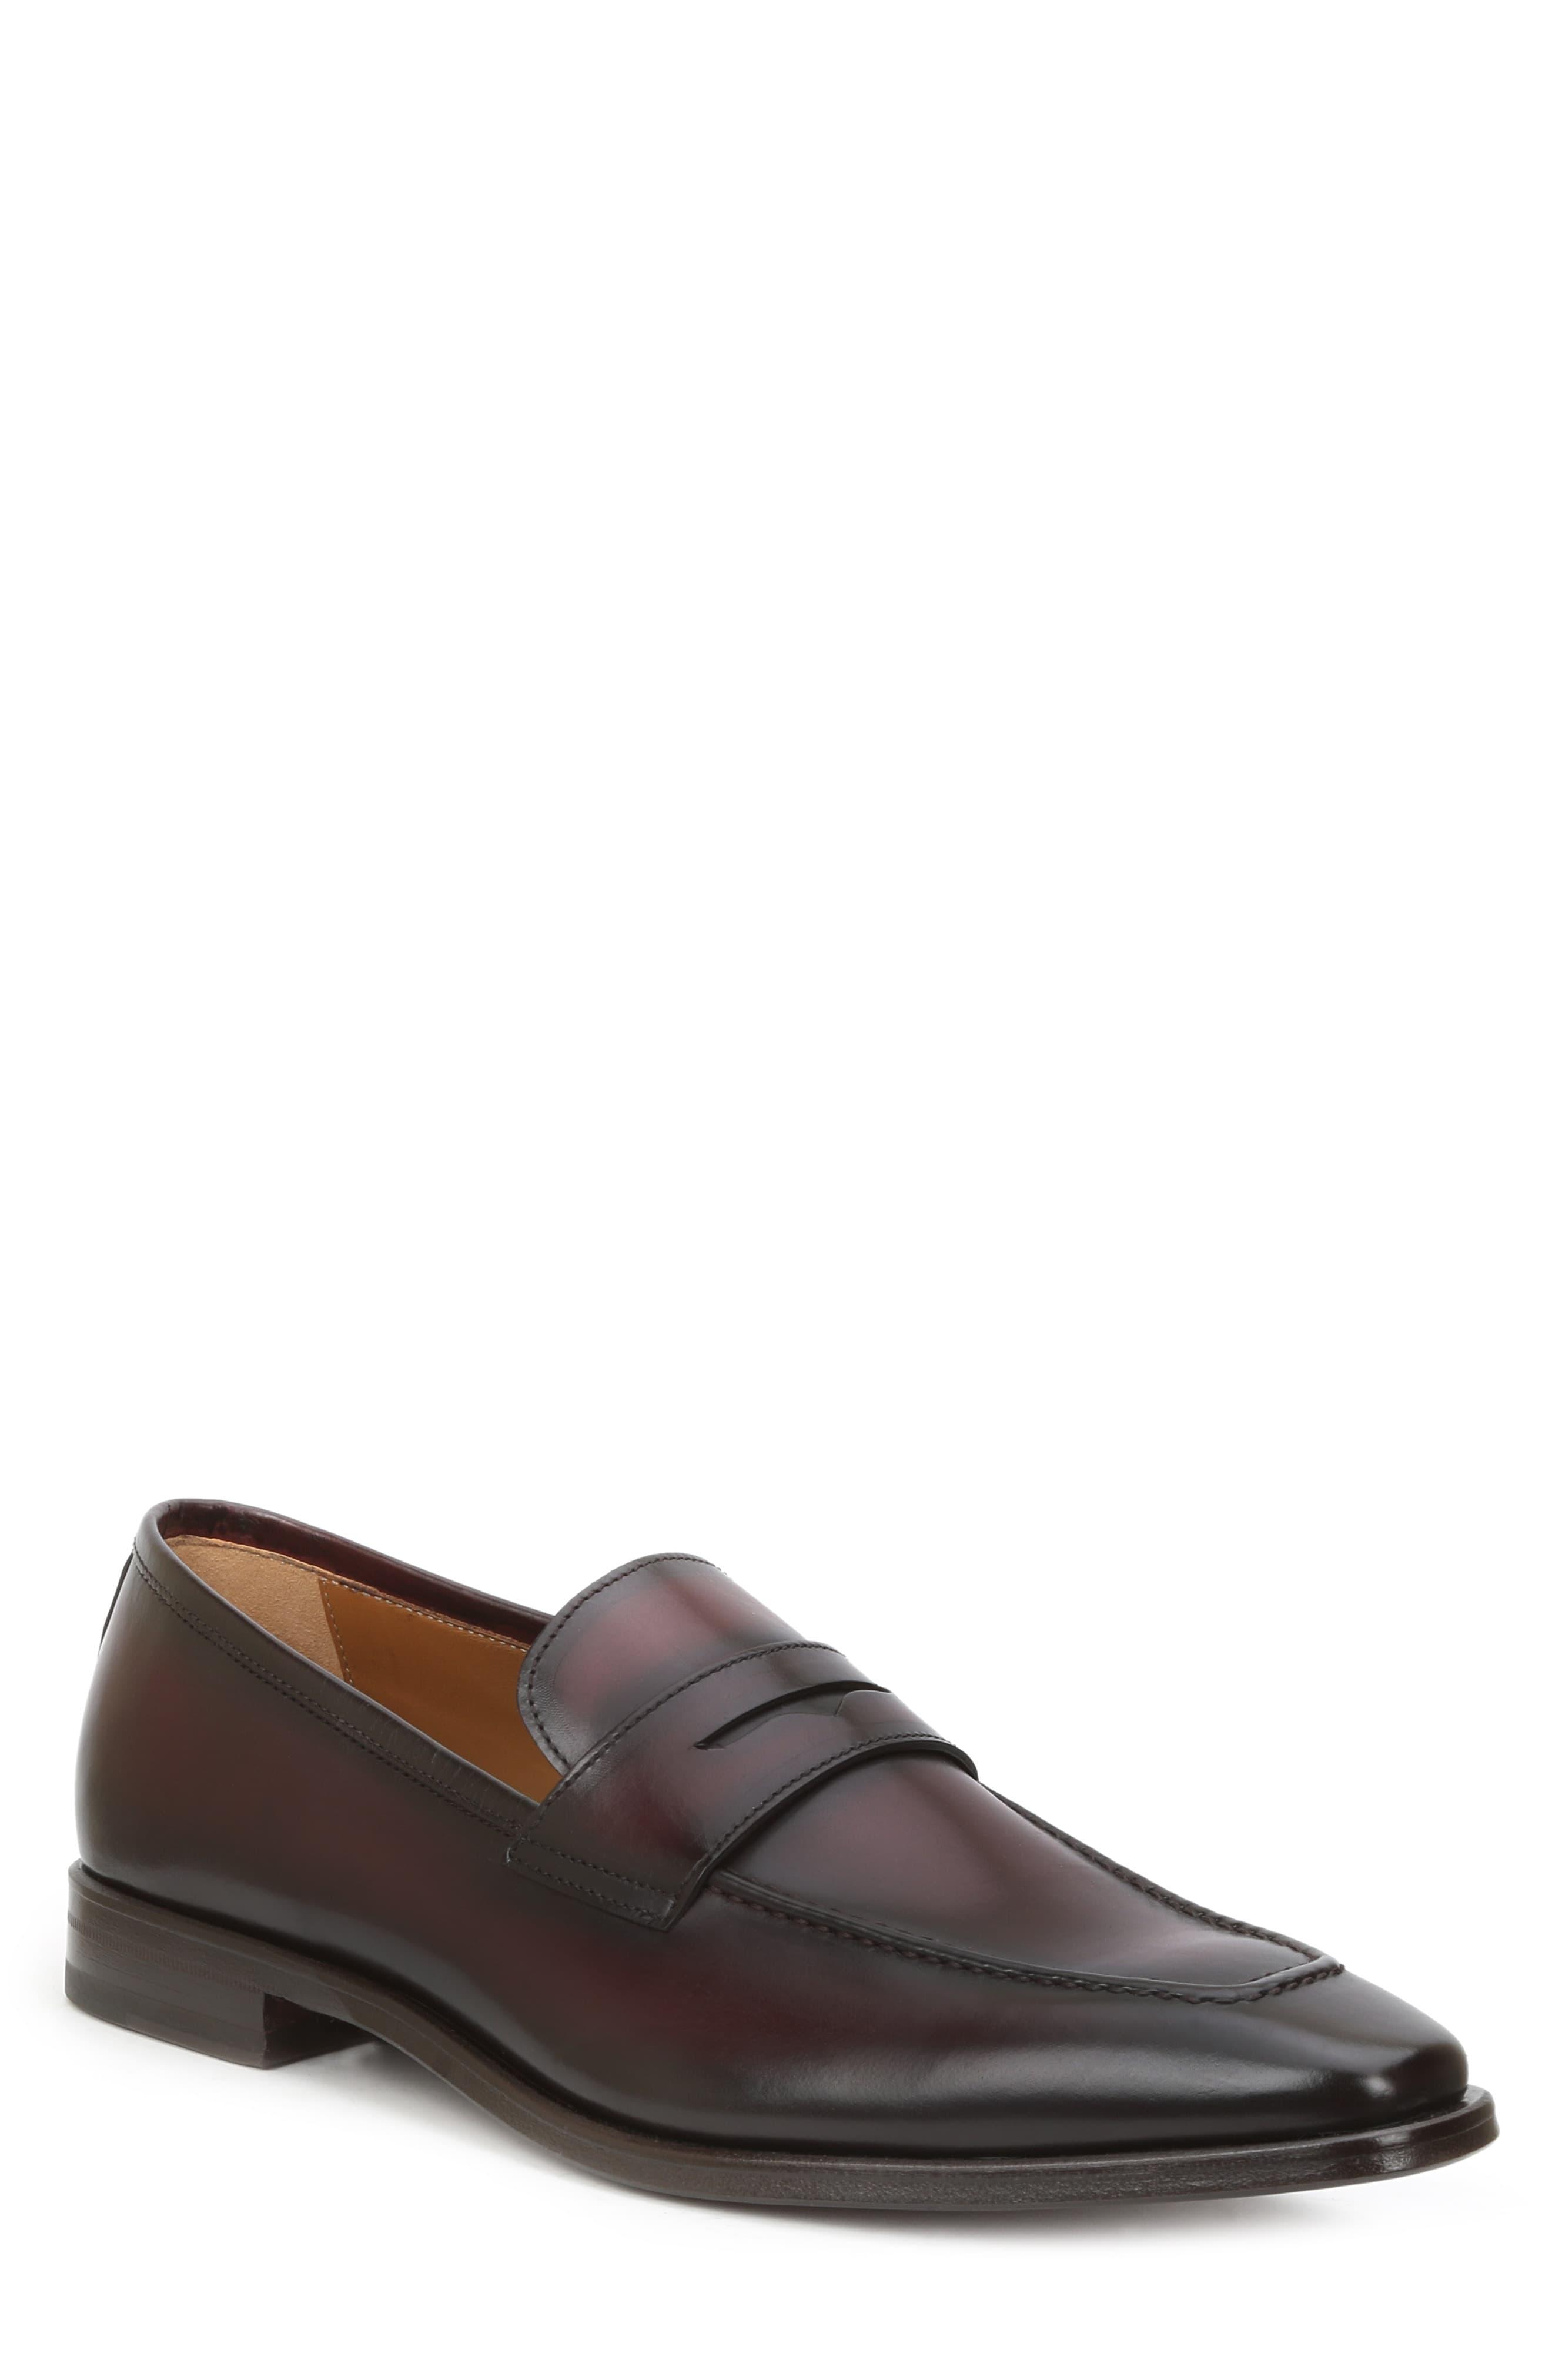 Bruno Magli Leather Corado Penny Loafer in Brown for Men - Lyst